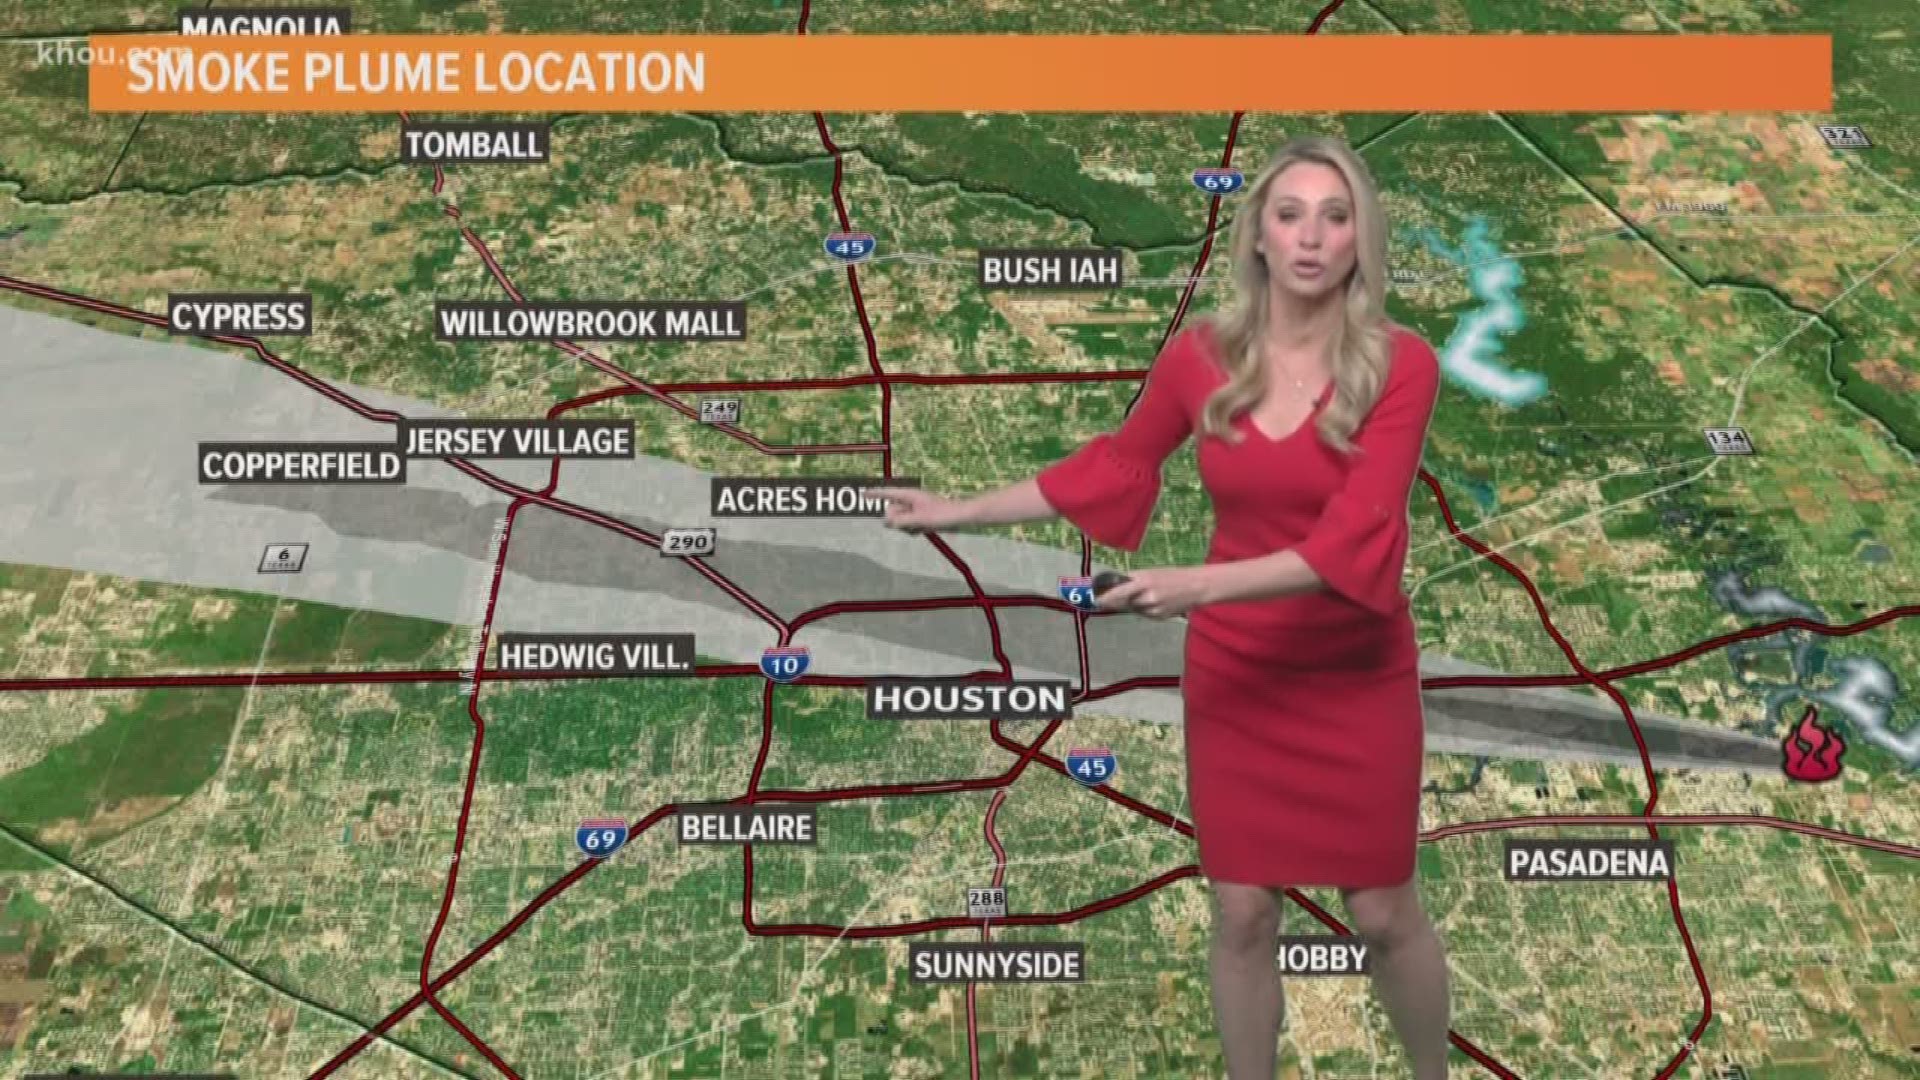 KHOU 11 Meteorologist Chita Craft say what's left of the plume of smoke from the now extinguished ITC fire will continue to move westward with winds out of the east.